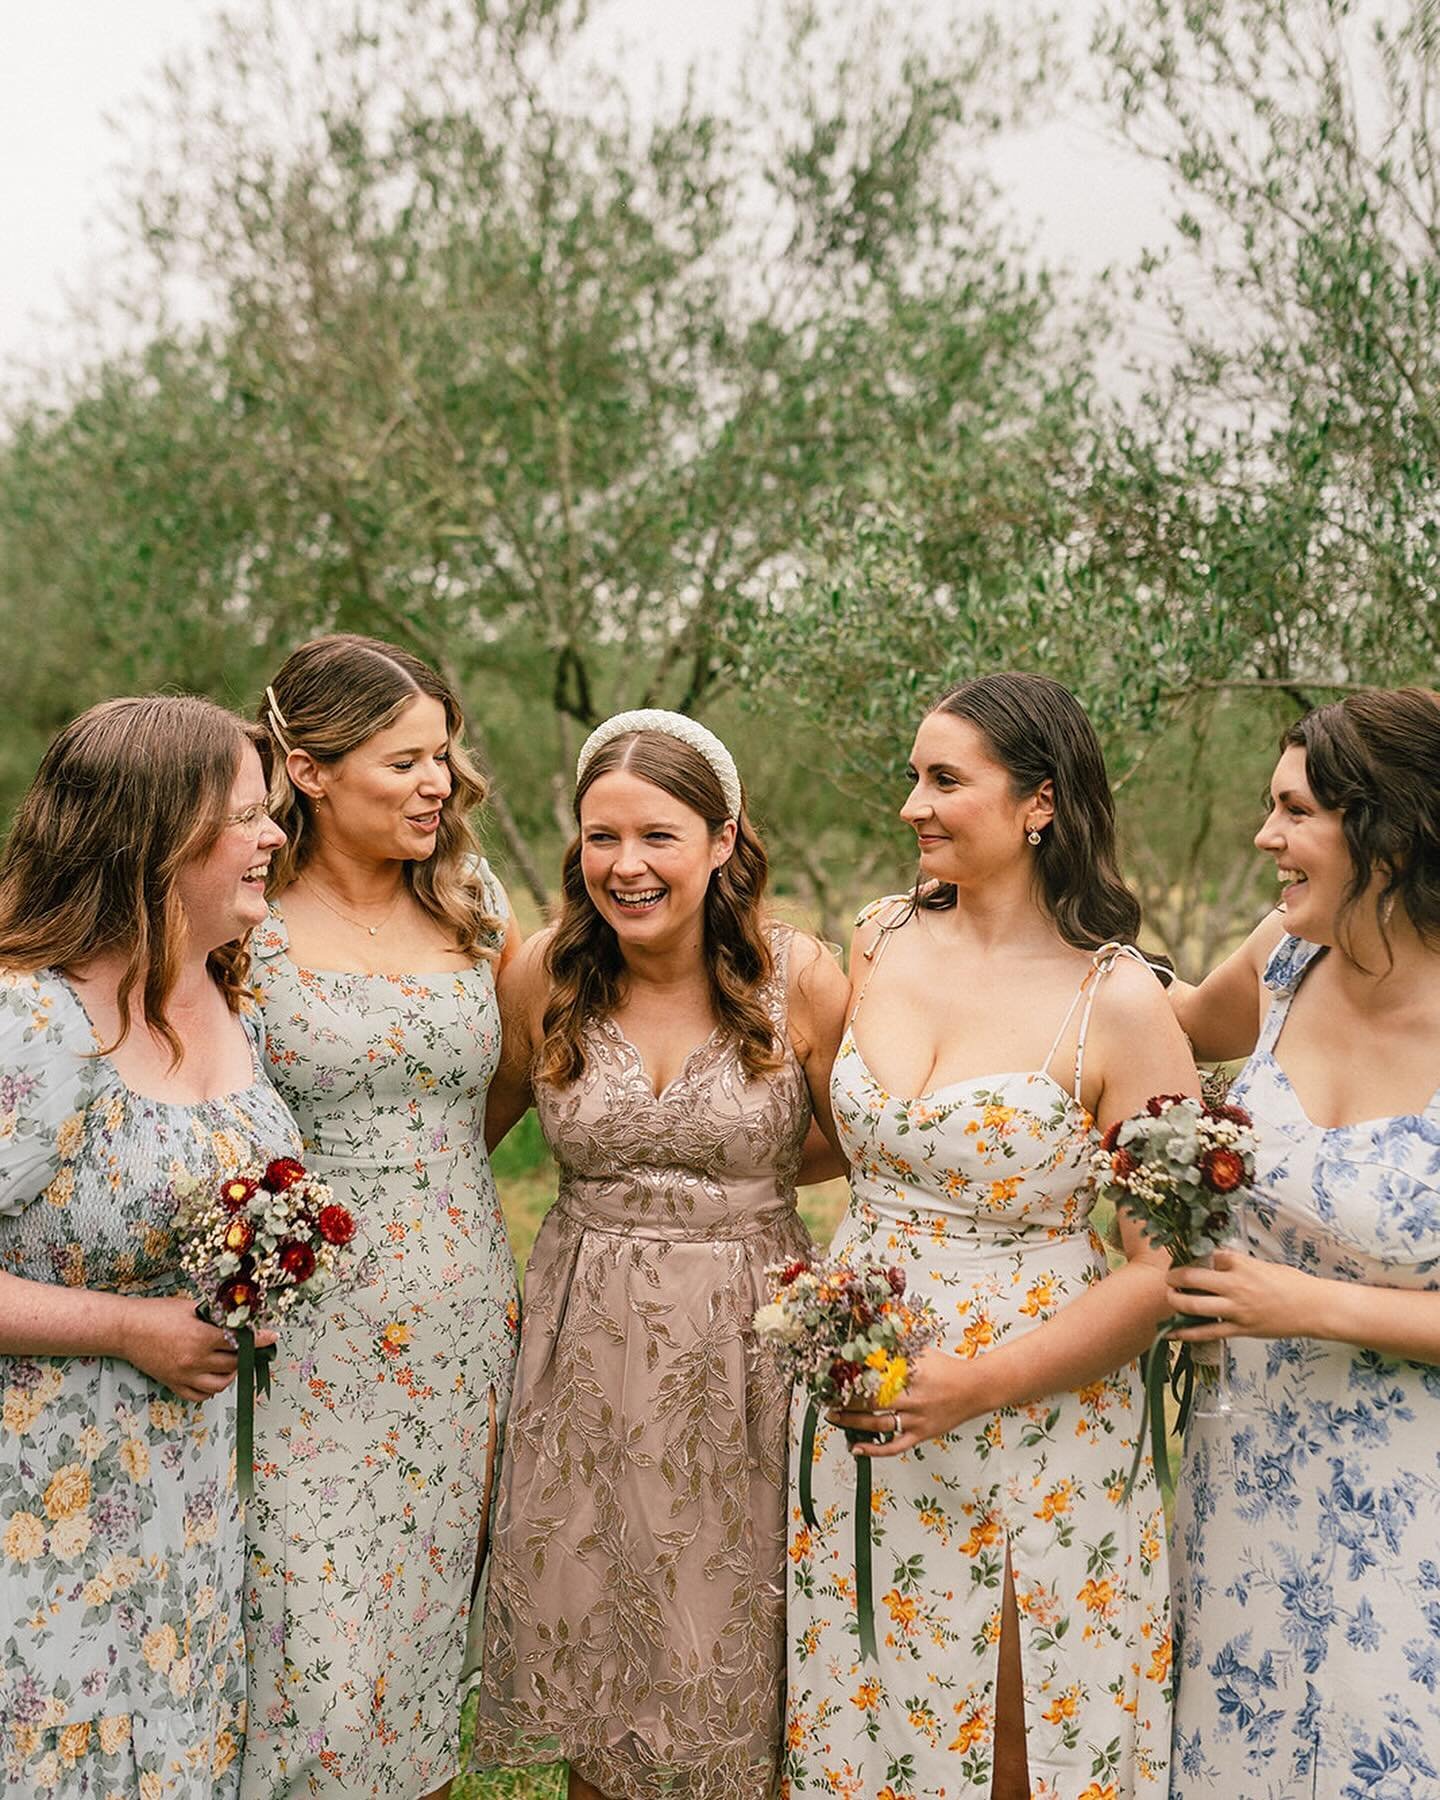 How good do this mismatched flora dresses look? It&rsquo;s giving garden party realness (even if the weather wasn&rsquo;t quite matching the vibe) 

It&rsquo;s super special being able to photograph one of your closest friends wedding days!